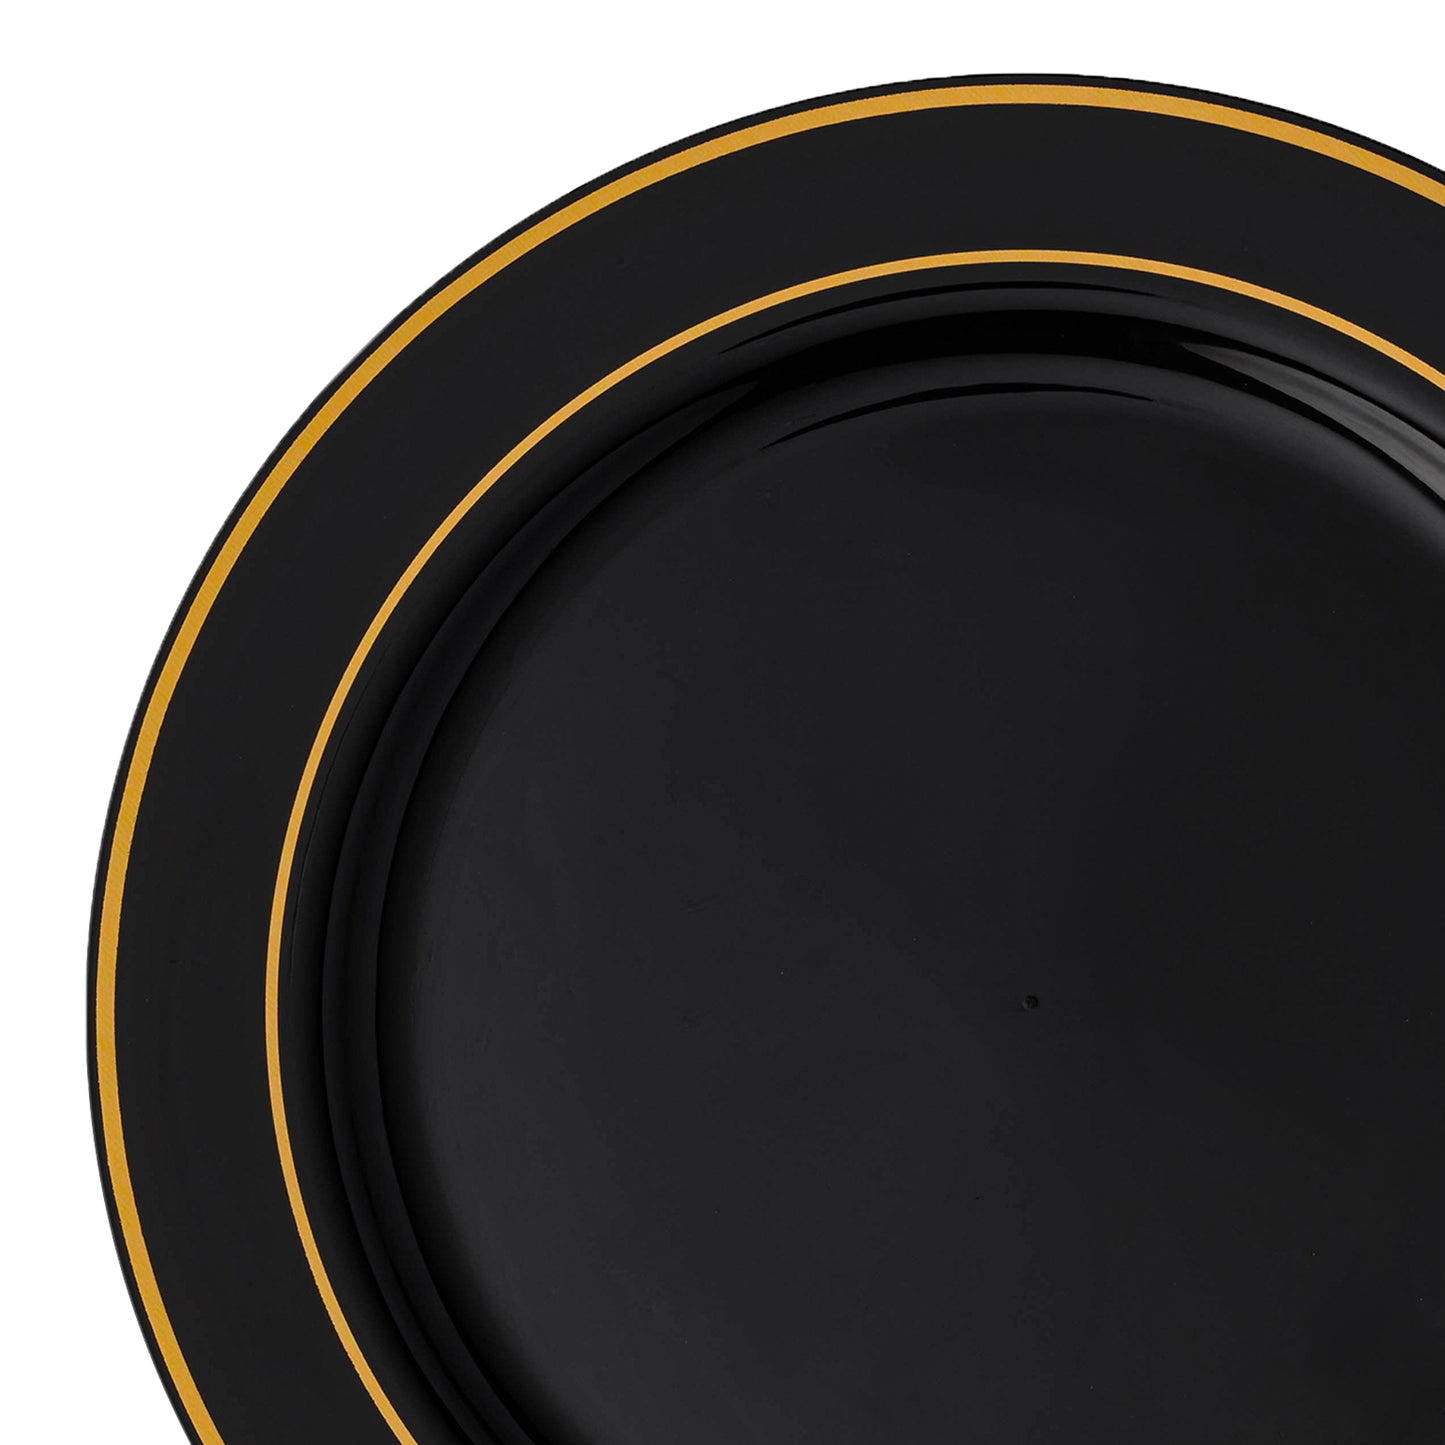 Black with Gold Edge Rim Plastic Appetizer/Salad Plates (7.5") | The Kaya Collection